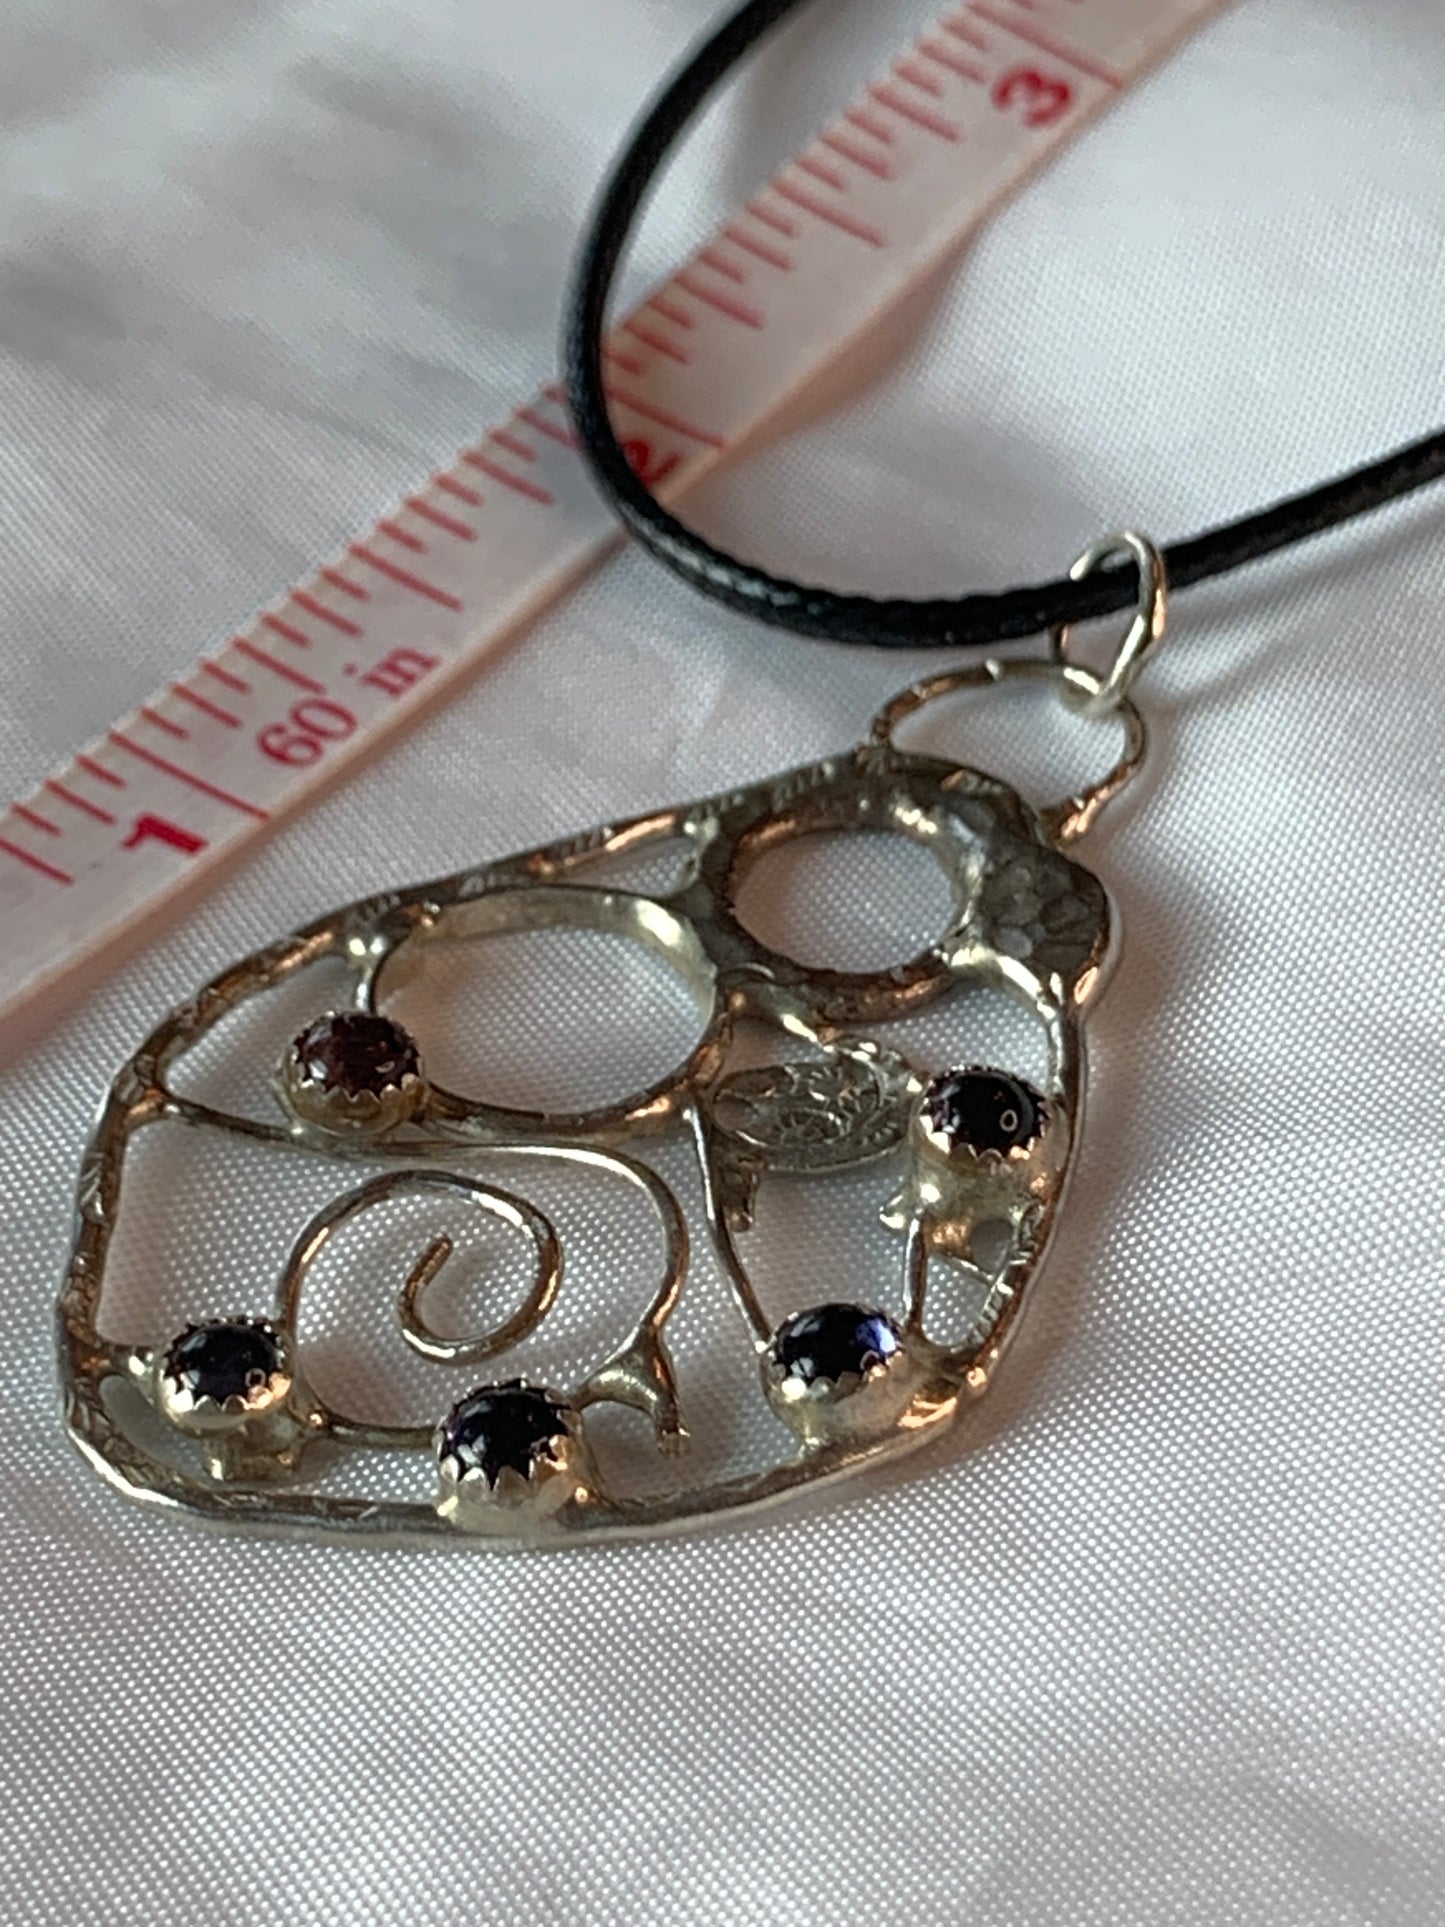 Large Abstract Filigree Sterling Silver Pendant with Tourmaline and Iolite Stones